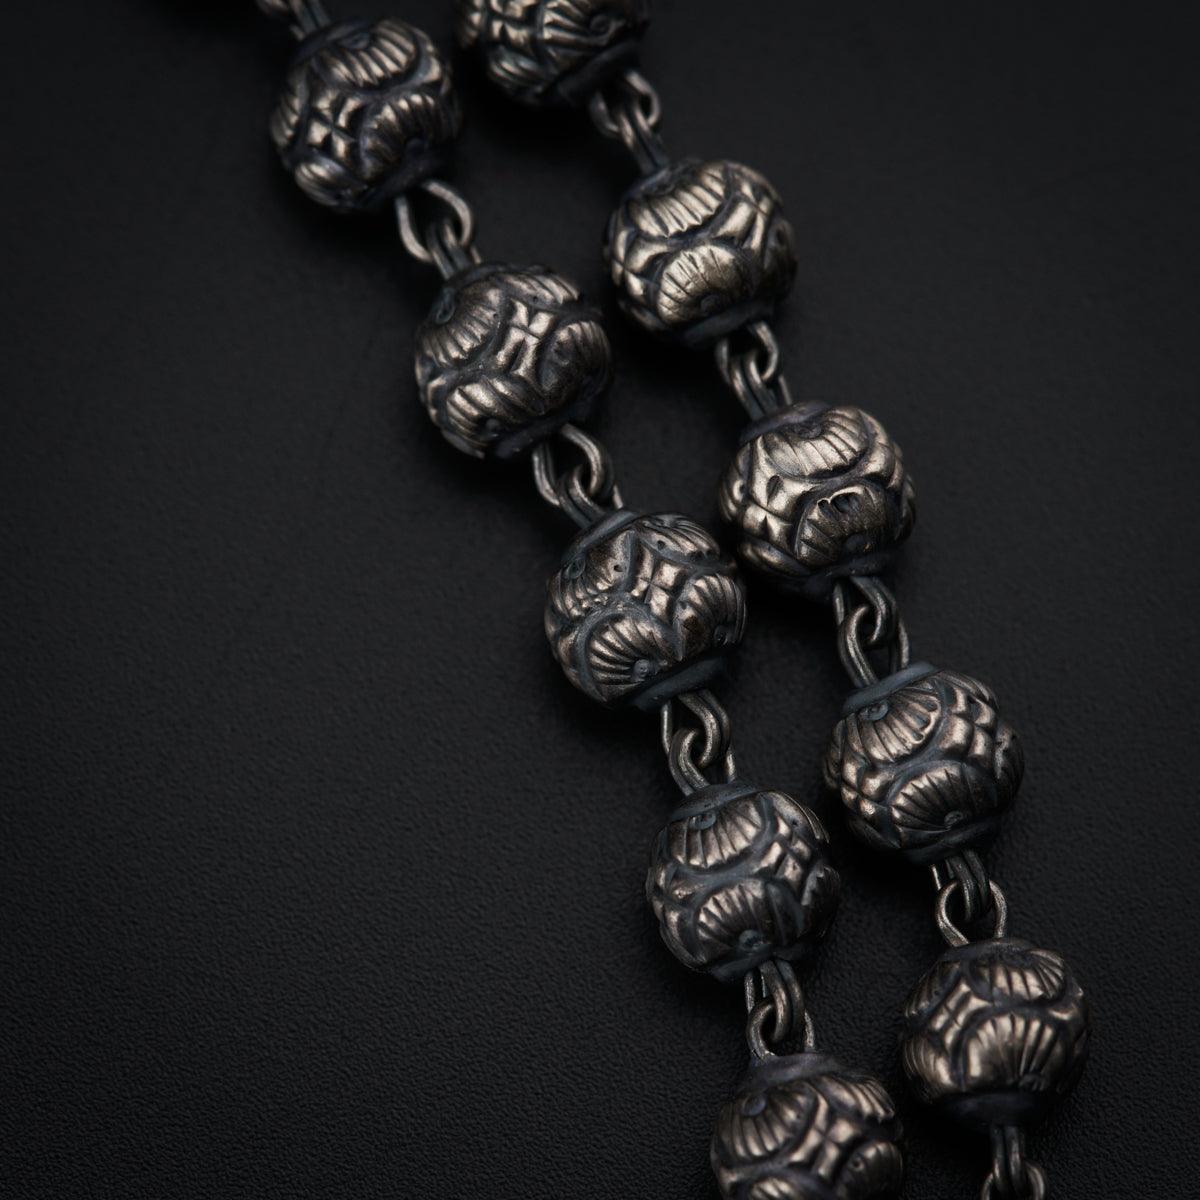 a close up of a metal chain on a black surface